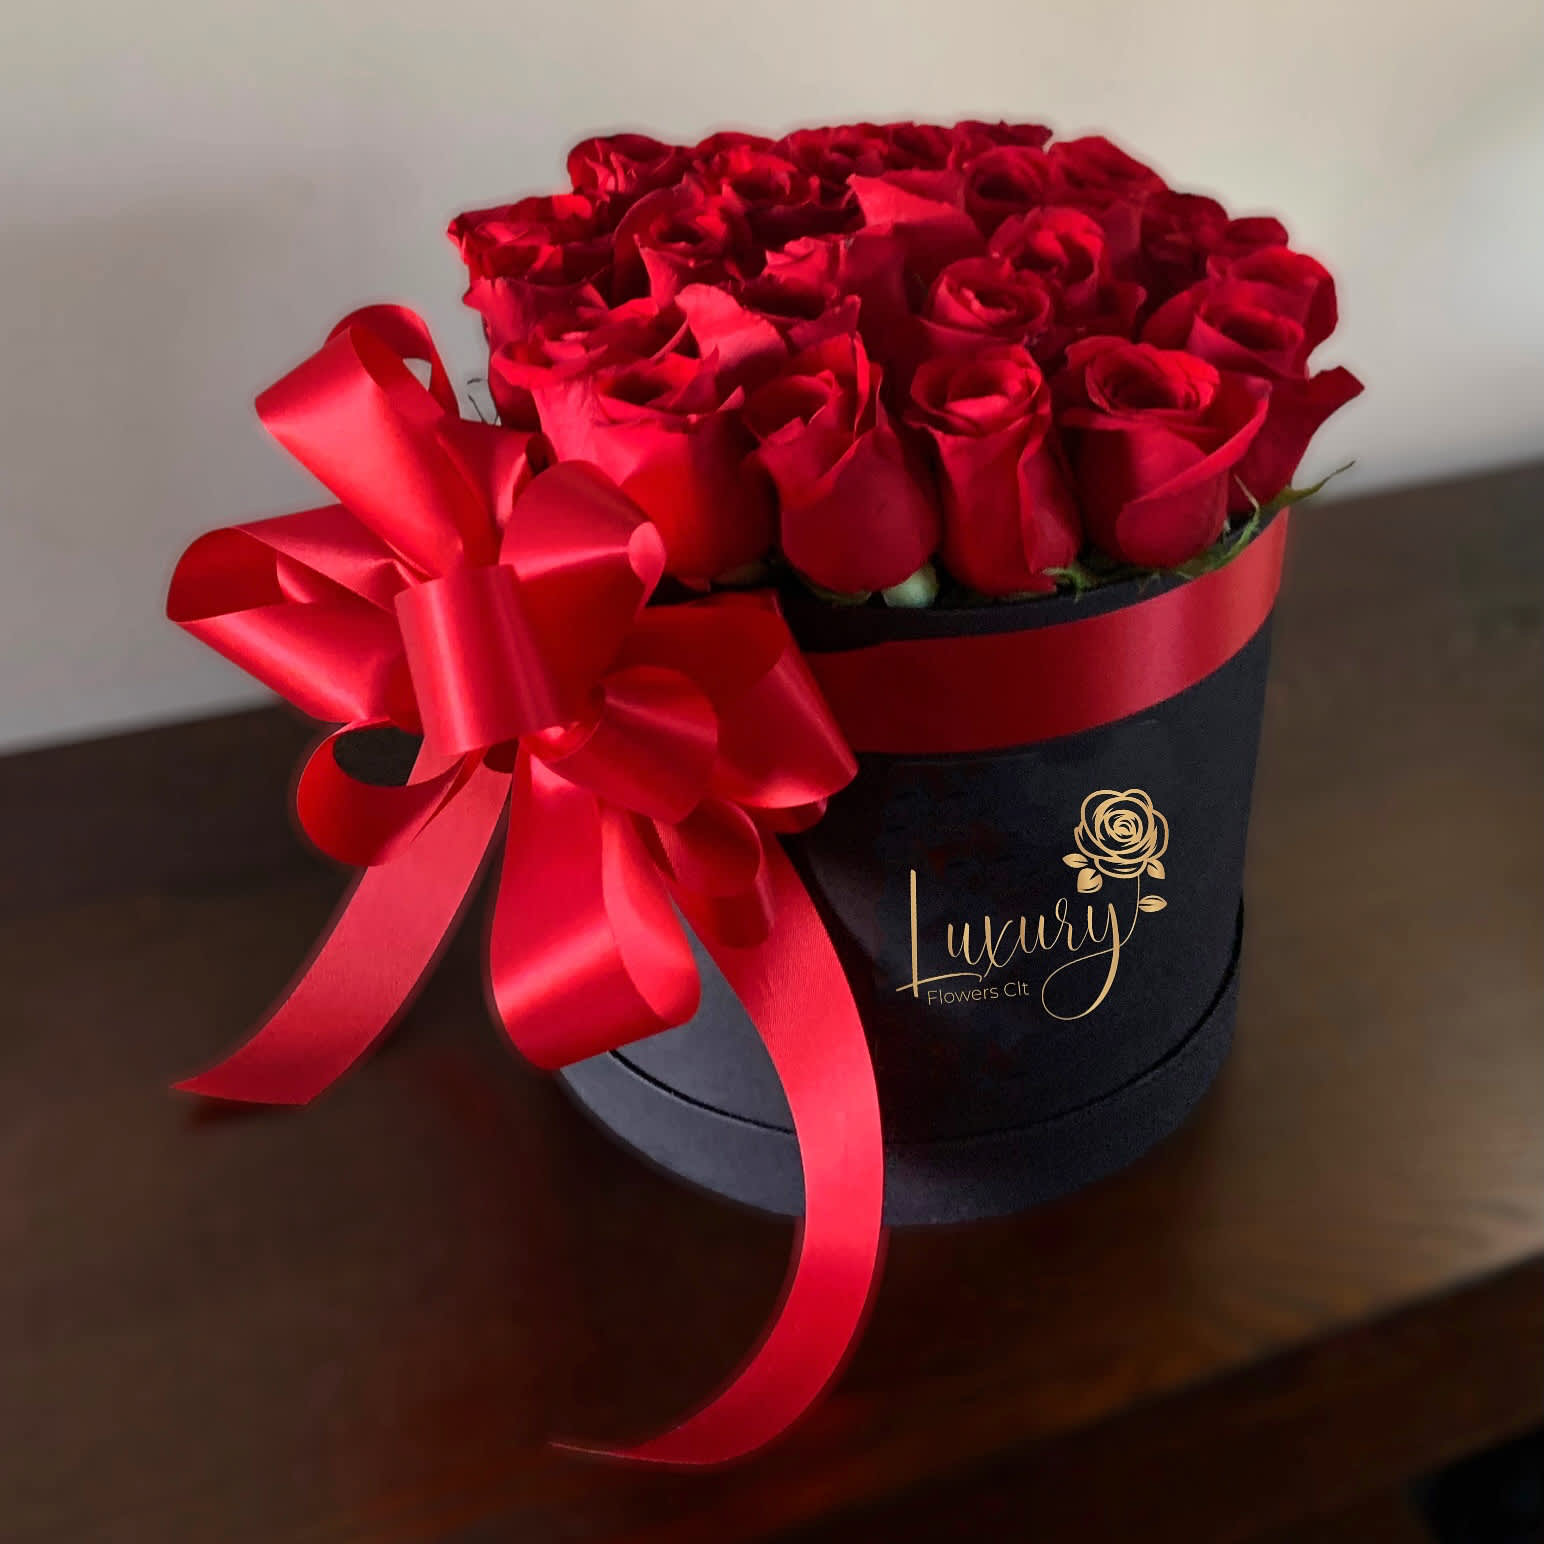 Everything I Need - Red - Our designs in beautiful round boxes are a true symbol of elegance. Whether you’re looking to impress your special person, show love to someone significant, or send a unique floral arrangement just because. •	Roses in Box: 30-35 stems of natural roses. Color Box: White or Black (subject to inventory availability) •	All Occasion •	Place your Order Online Monday to Saturday before 1:00 p.m. (E.T.) for same-day delivery.  •	“Orders received after hours will be delivered the next business day”. •	Check our coverage area. •	Occasionally, substitutions of flowers and/or containers happen due to weather, seasonality, and market conditions which may affect availability. If this is the case with the gift you’ve selected, we will ensure that the style, theme, and color scheme of your arrangement are preserved and will only substitute items of equal value or higher value.  CARE INSTRUCTIONS Gently mist the arrangement with natural water every other day. Do not spray any cleaning product on the flower arrangement. Do not place heavy objects directly on the flower arrangement. Keep them out of direct sunlight and extreme heat. 